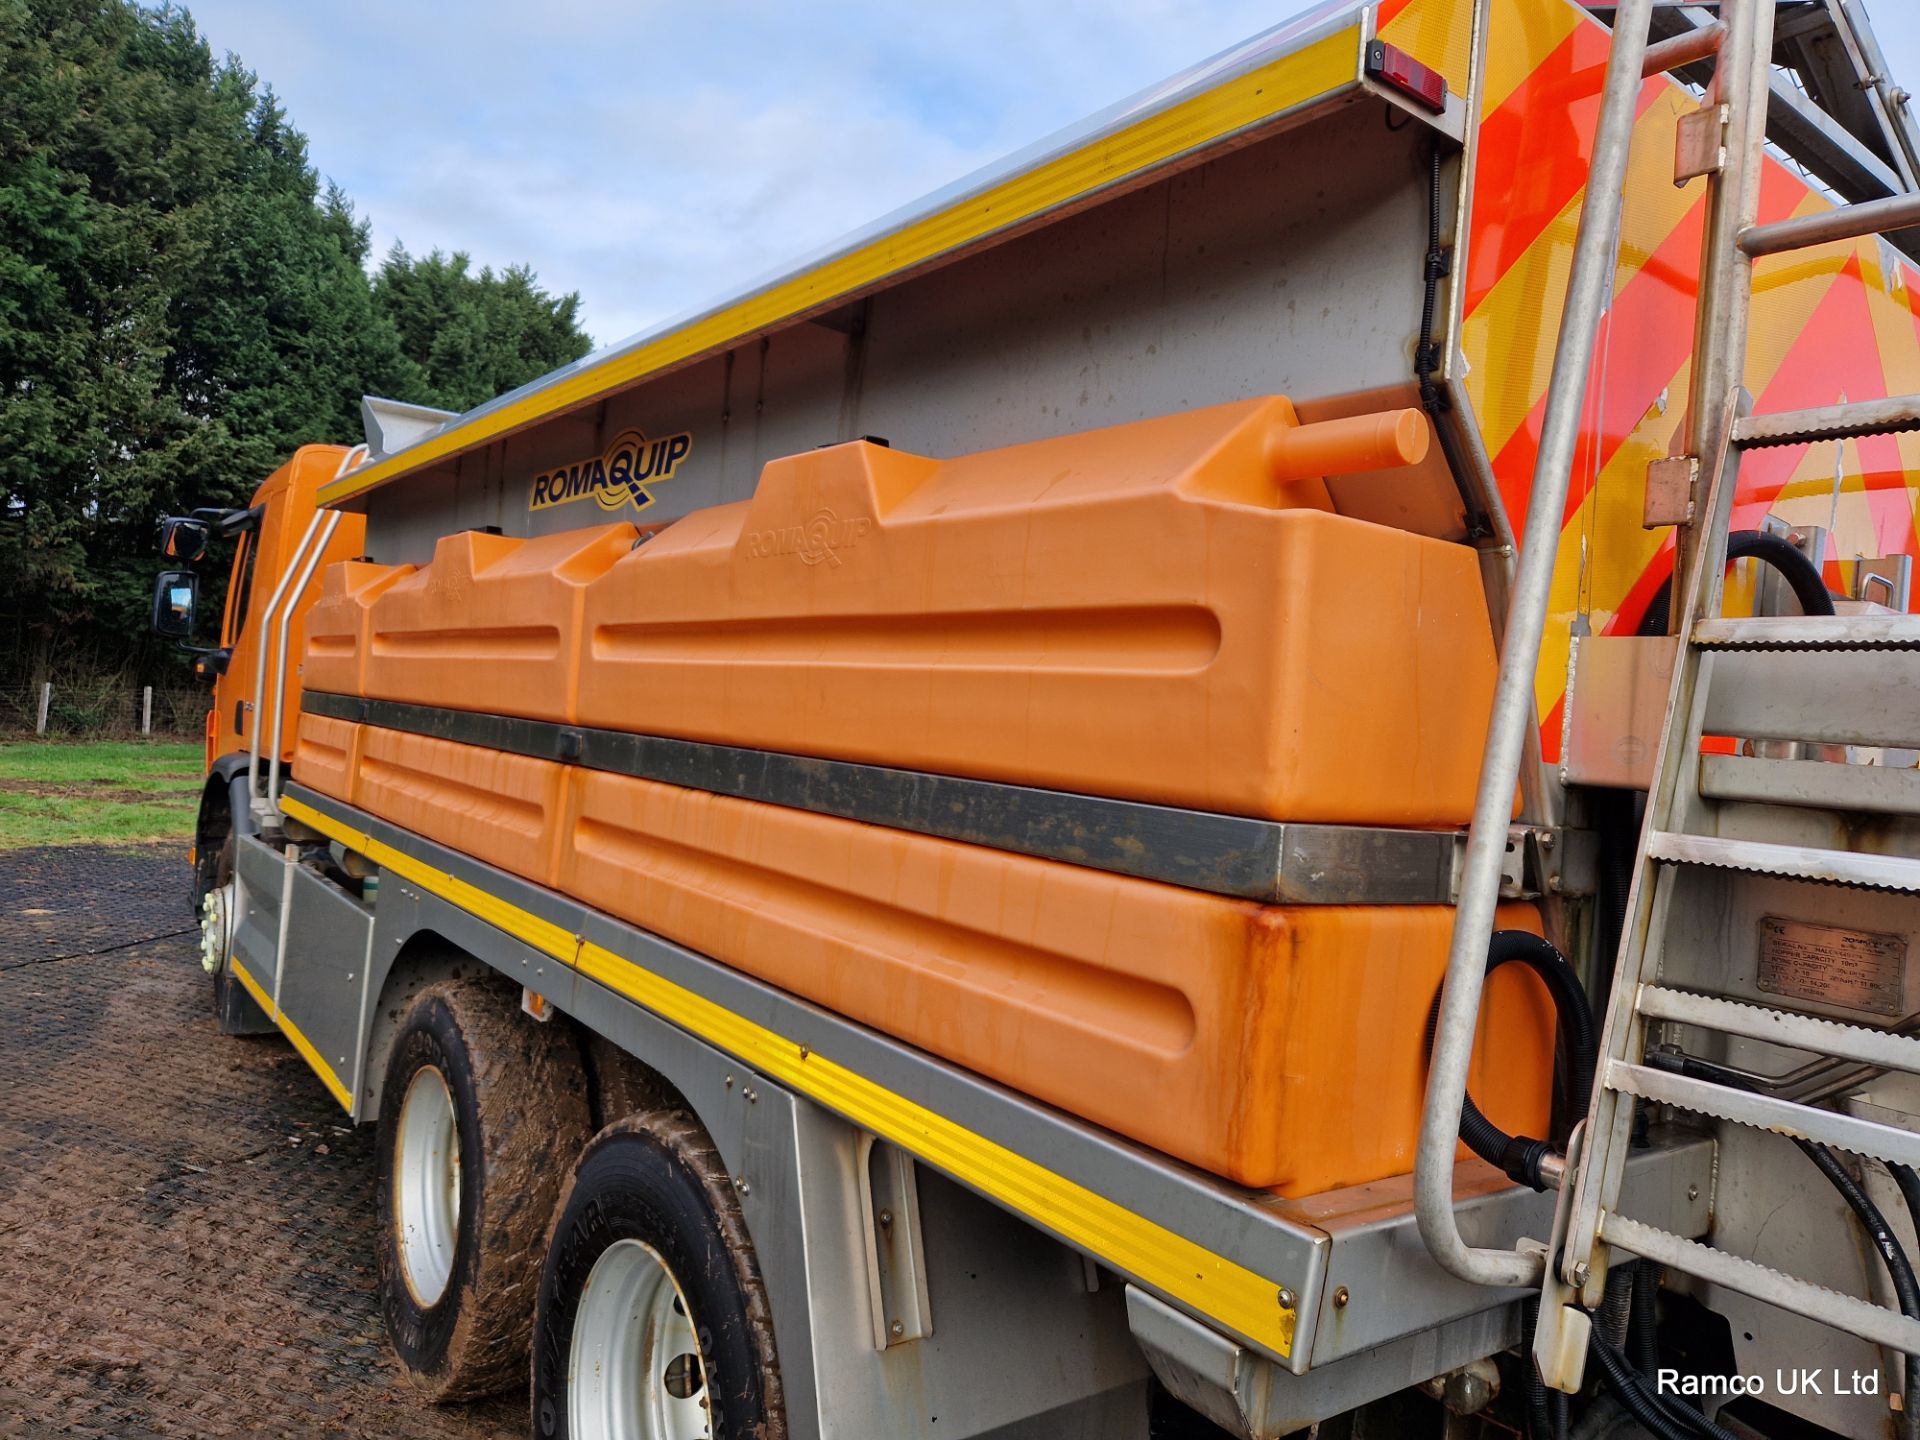 2010 (reg KN10 EDL) Volvo FE 340 6x4 with Romaquip wet gritter mount. - Image 9 of 20